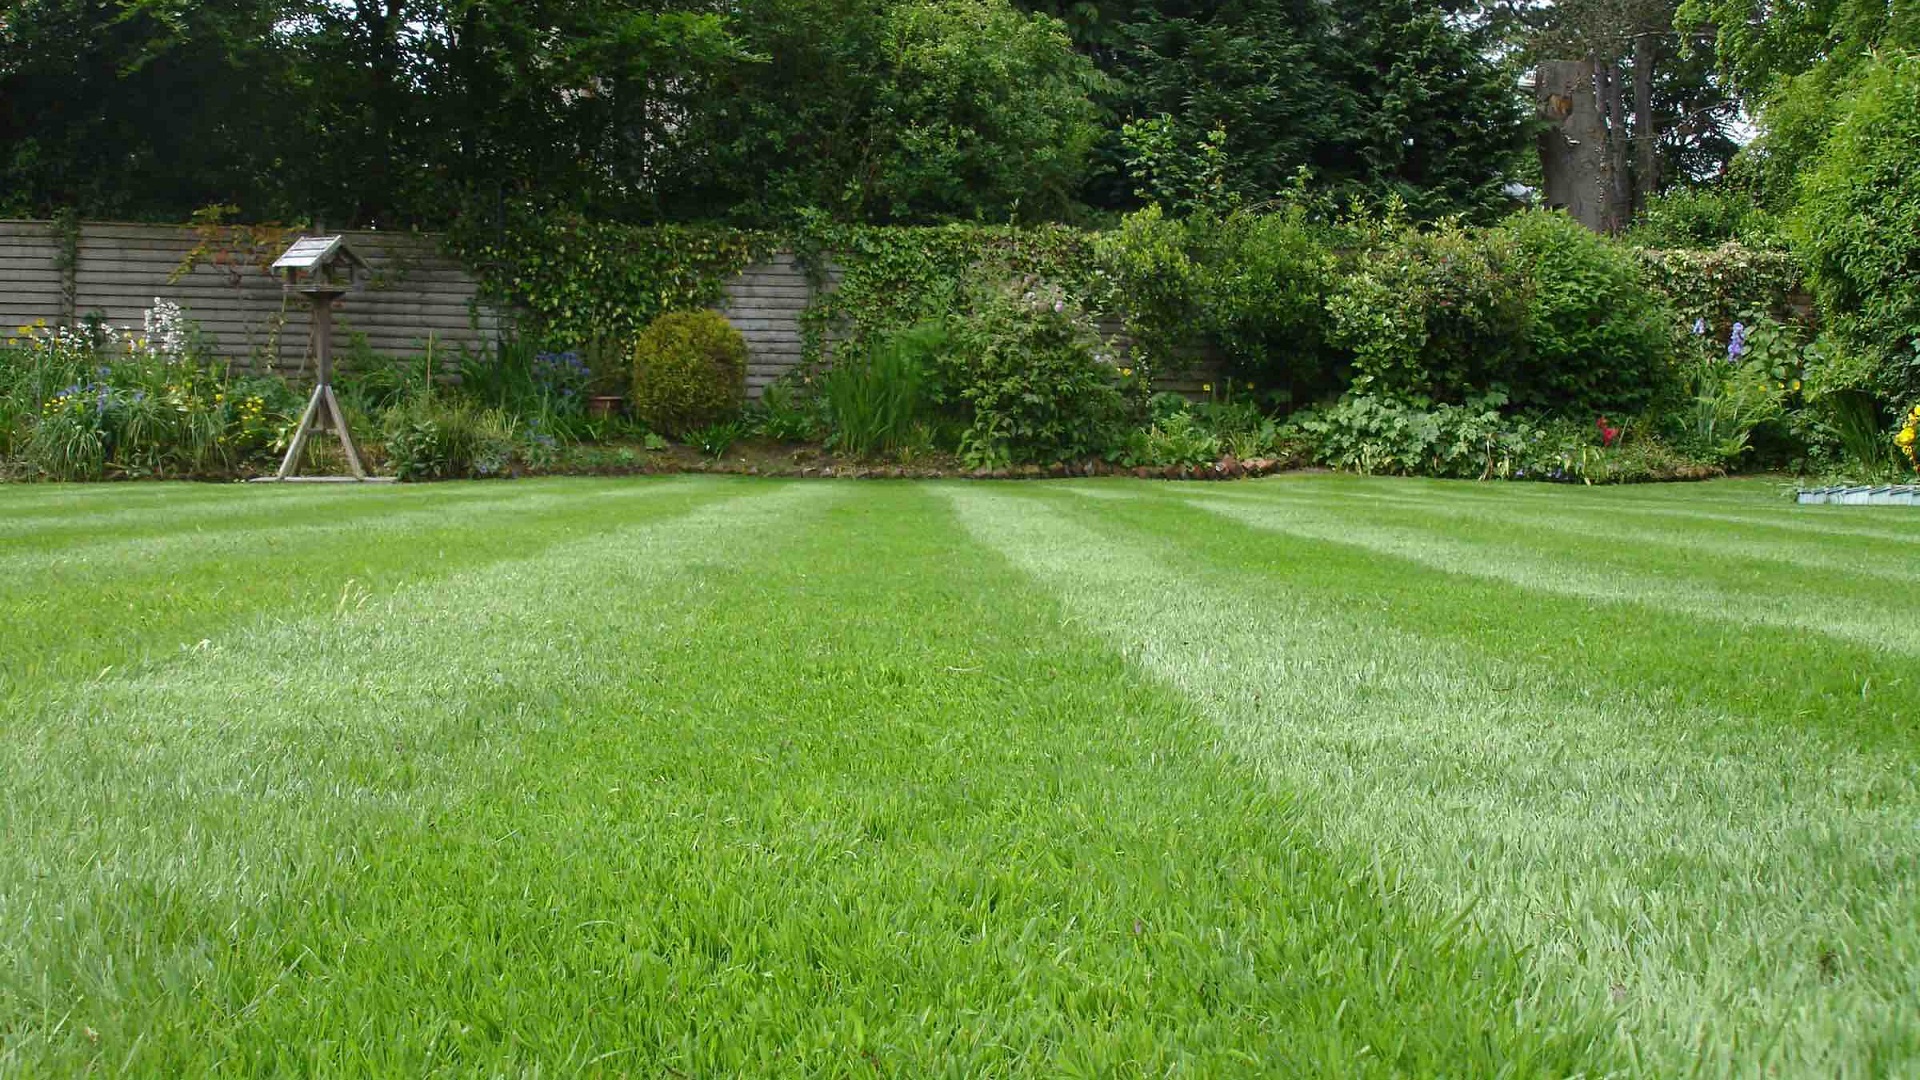 What Causes Lawn Depressions and How to Fix Them?